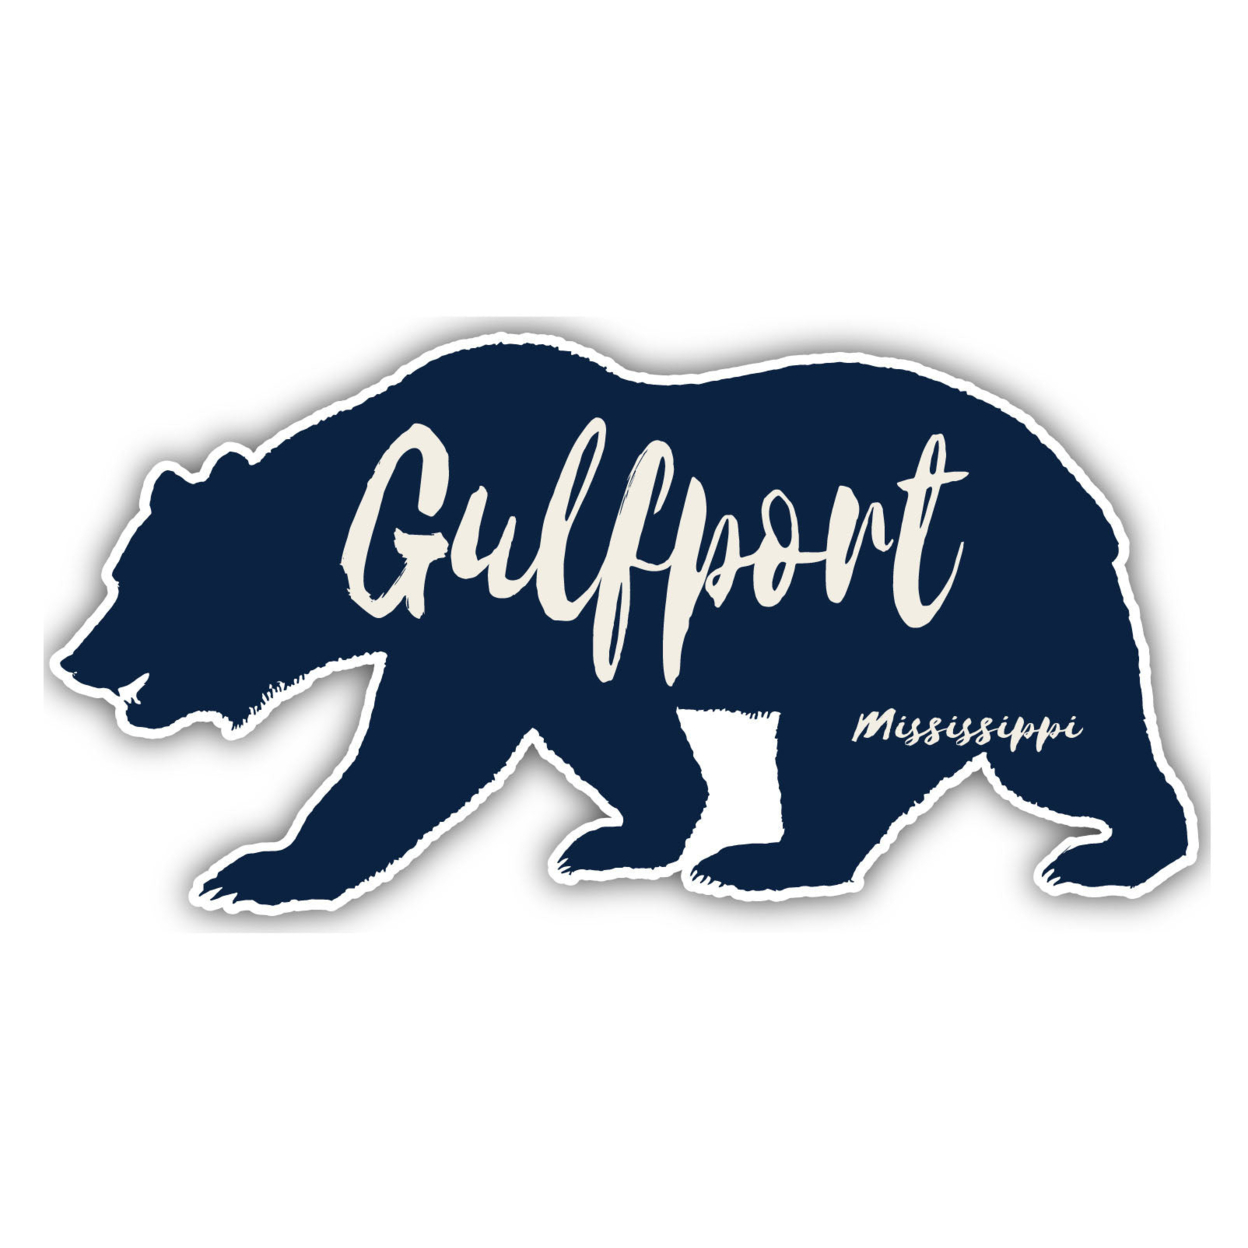 Gulfport Mississippi Souvenir Decorative Stickers (Choose Theme And Size) - 4-Pack, 2-Inch, Bear